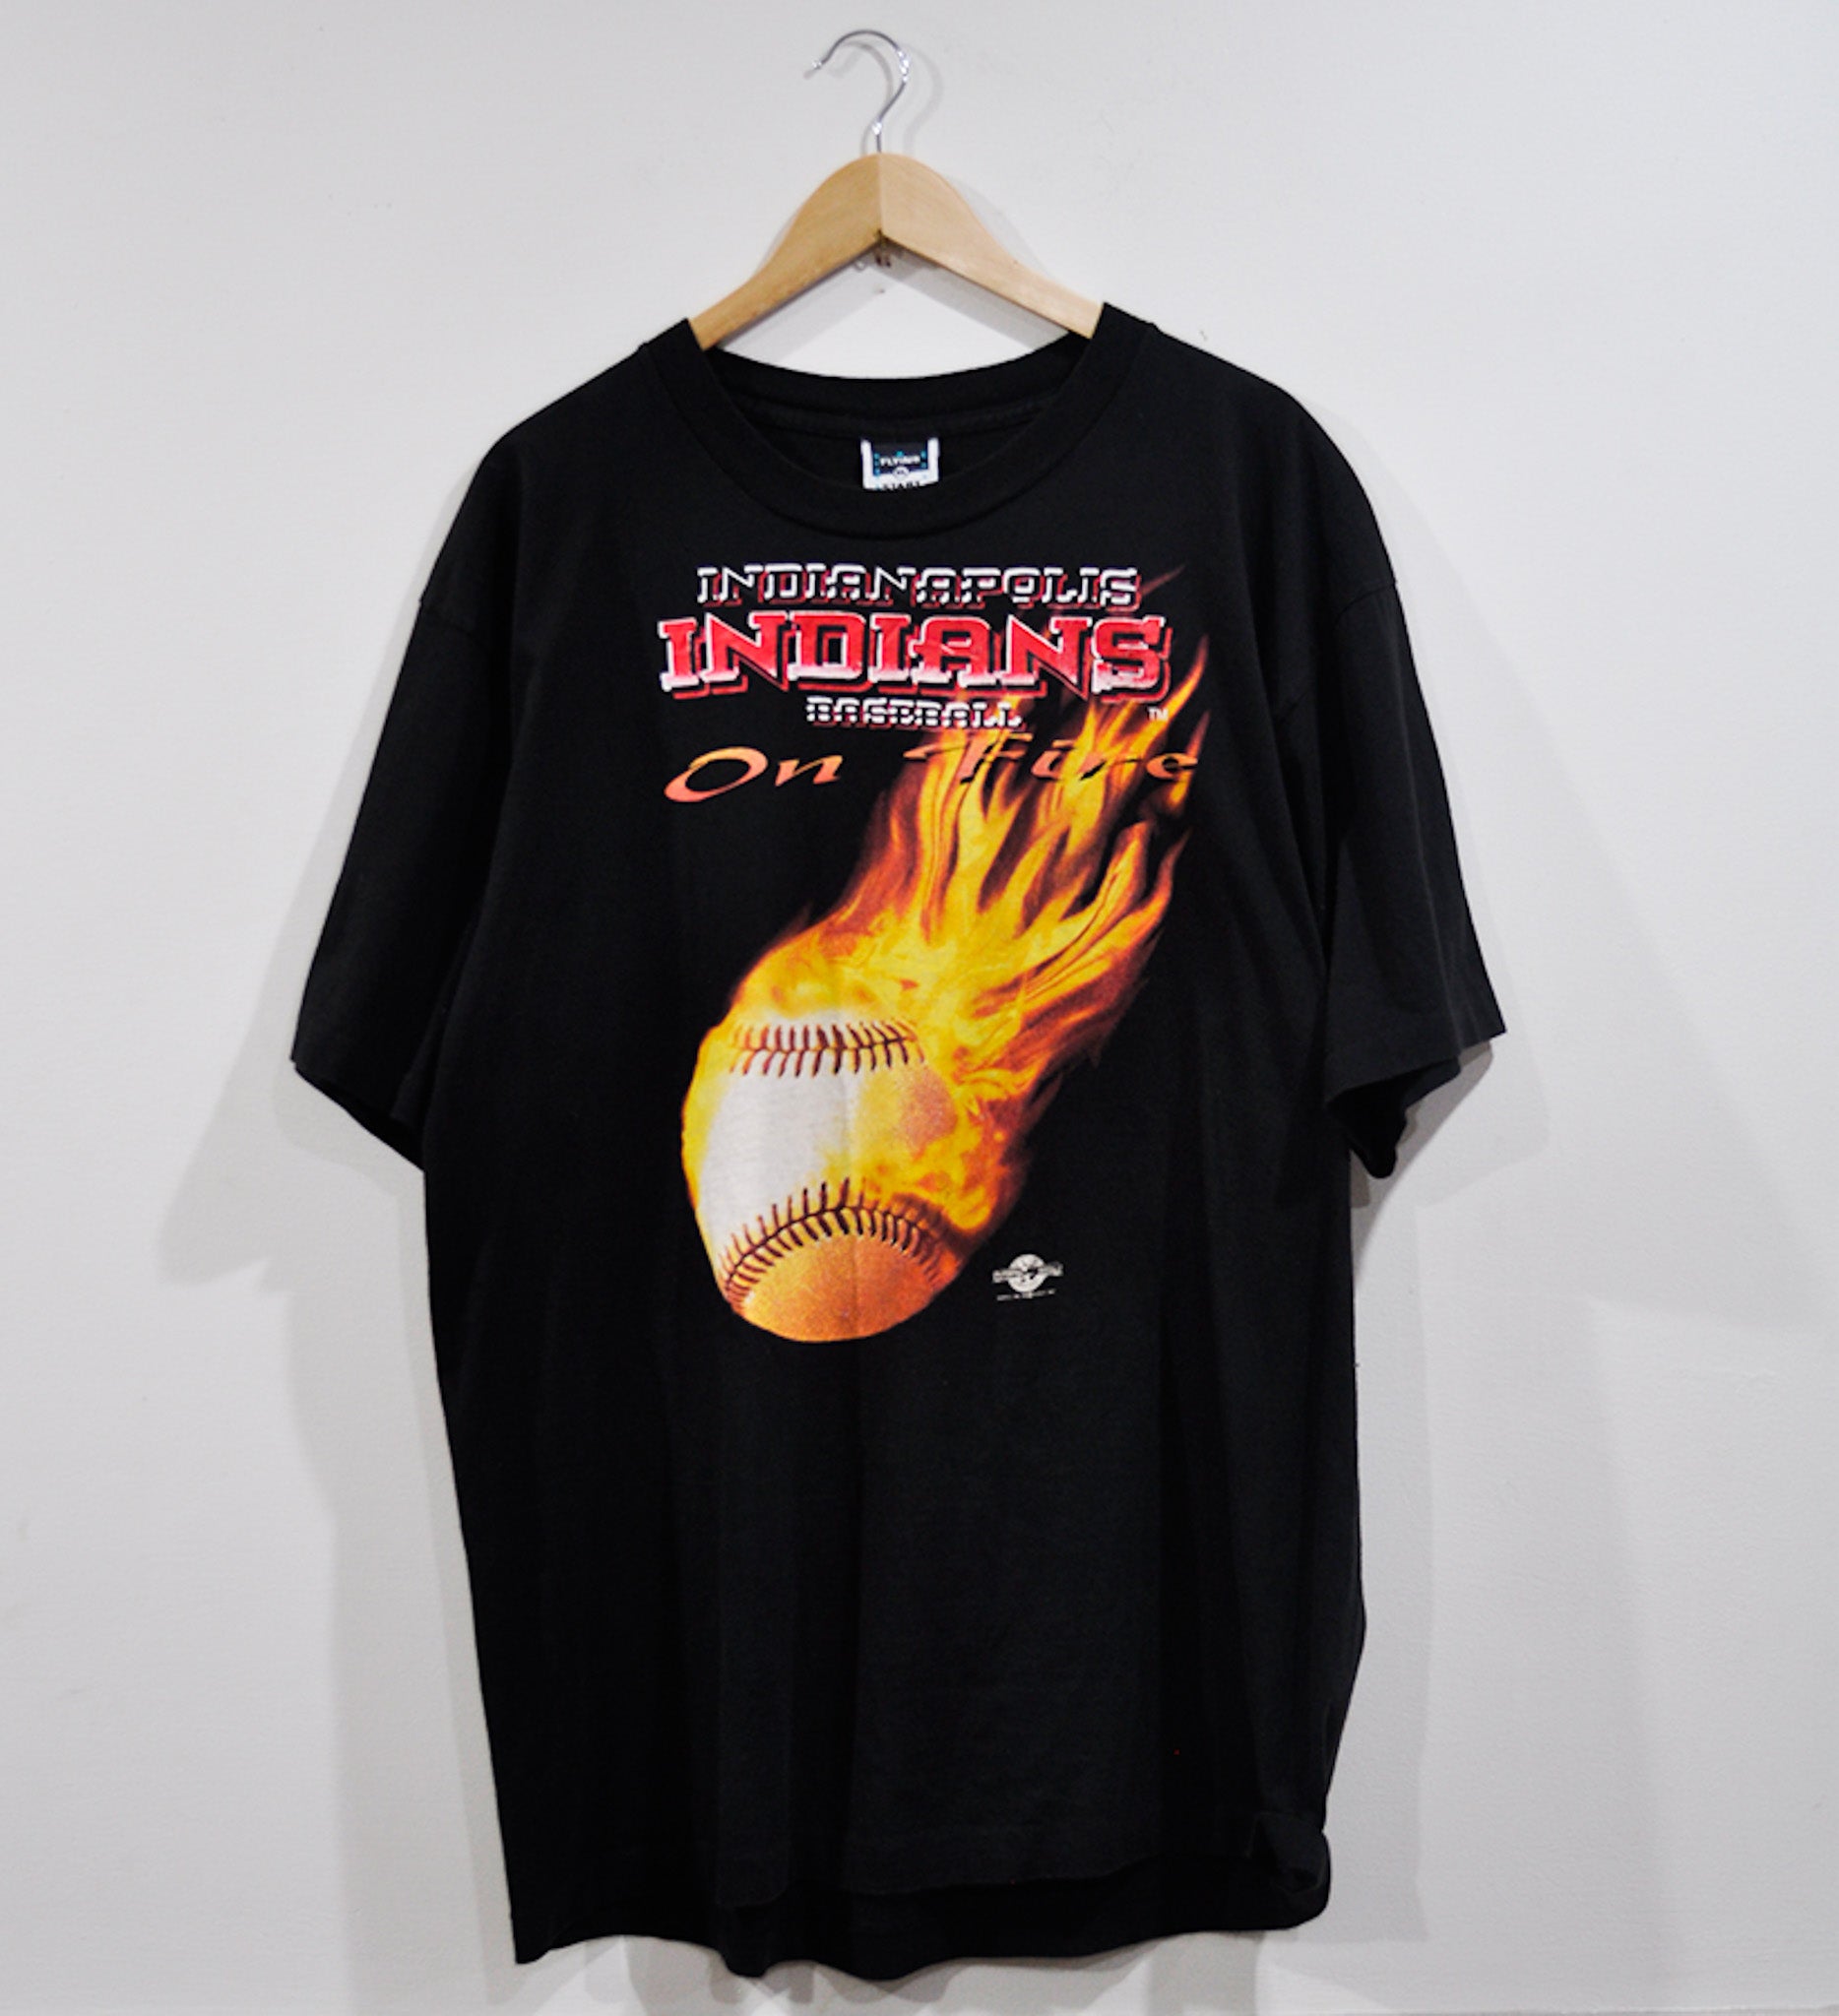 INDIANAPOLIS INDIANS "On Fire" TEE